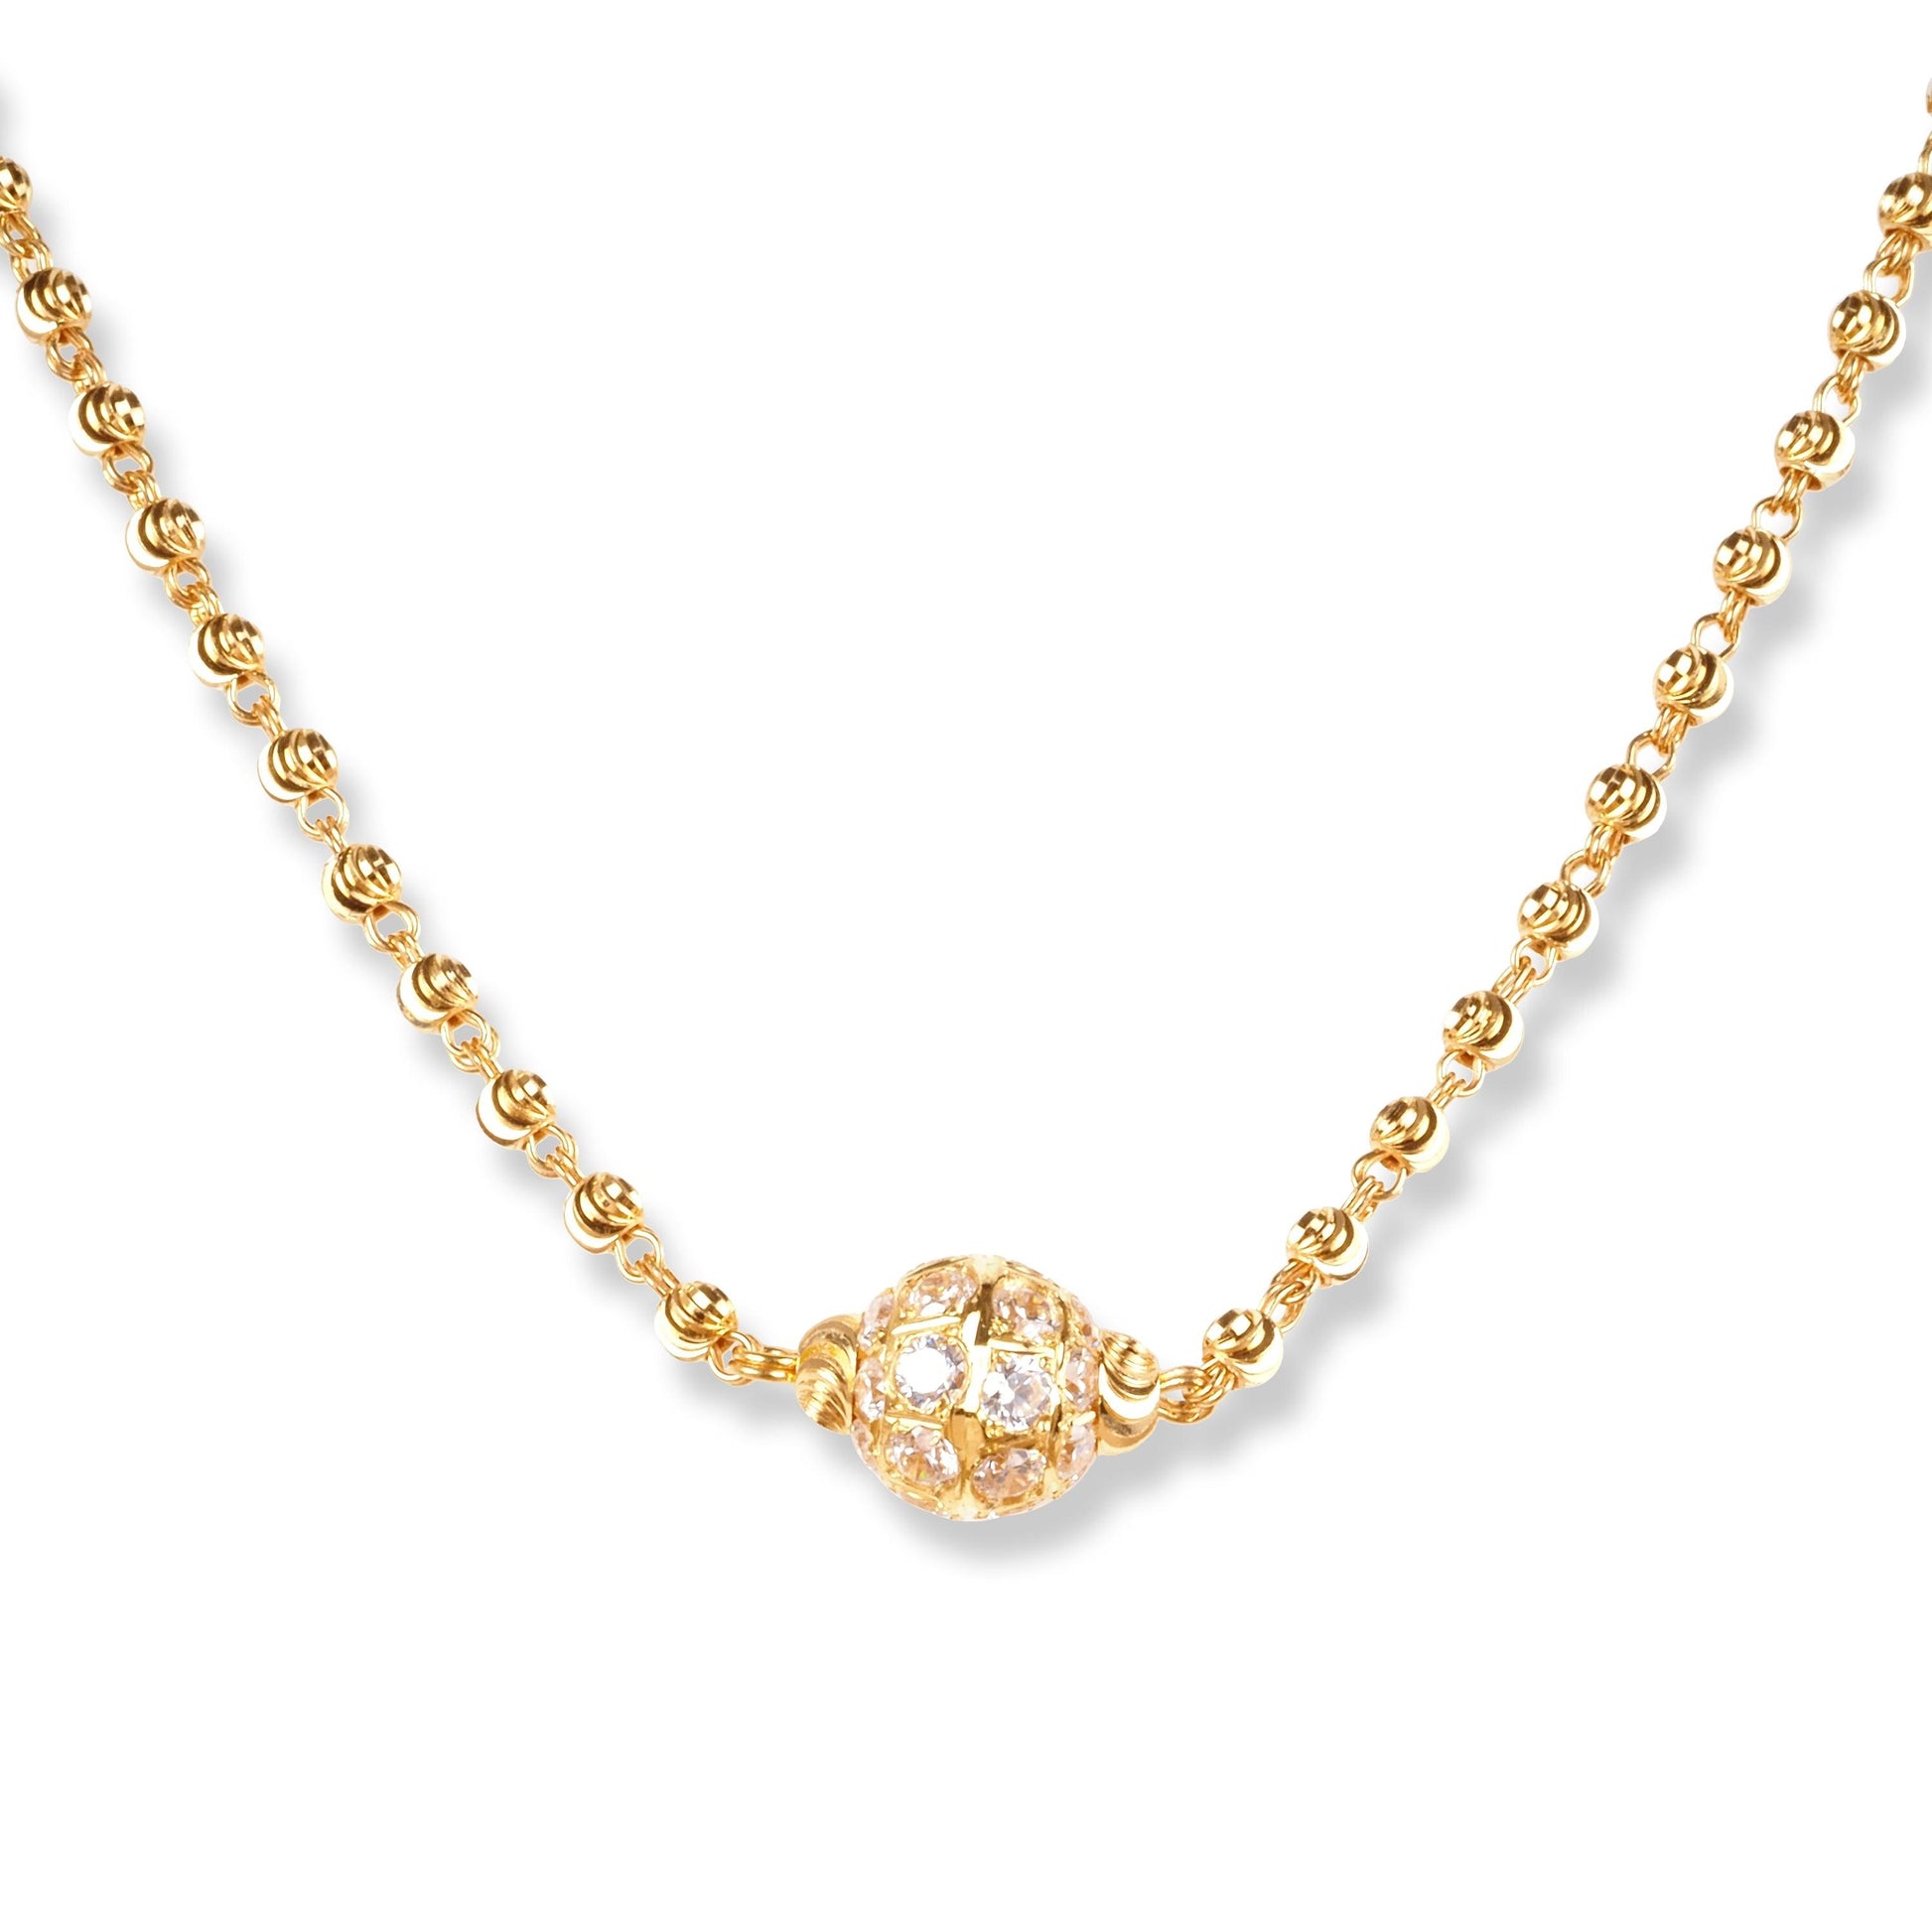 22ct Gold Necklace with Cubic Zirconia Stones and Single Bead N-7899 - Minar Jewellers